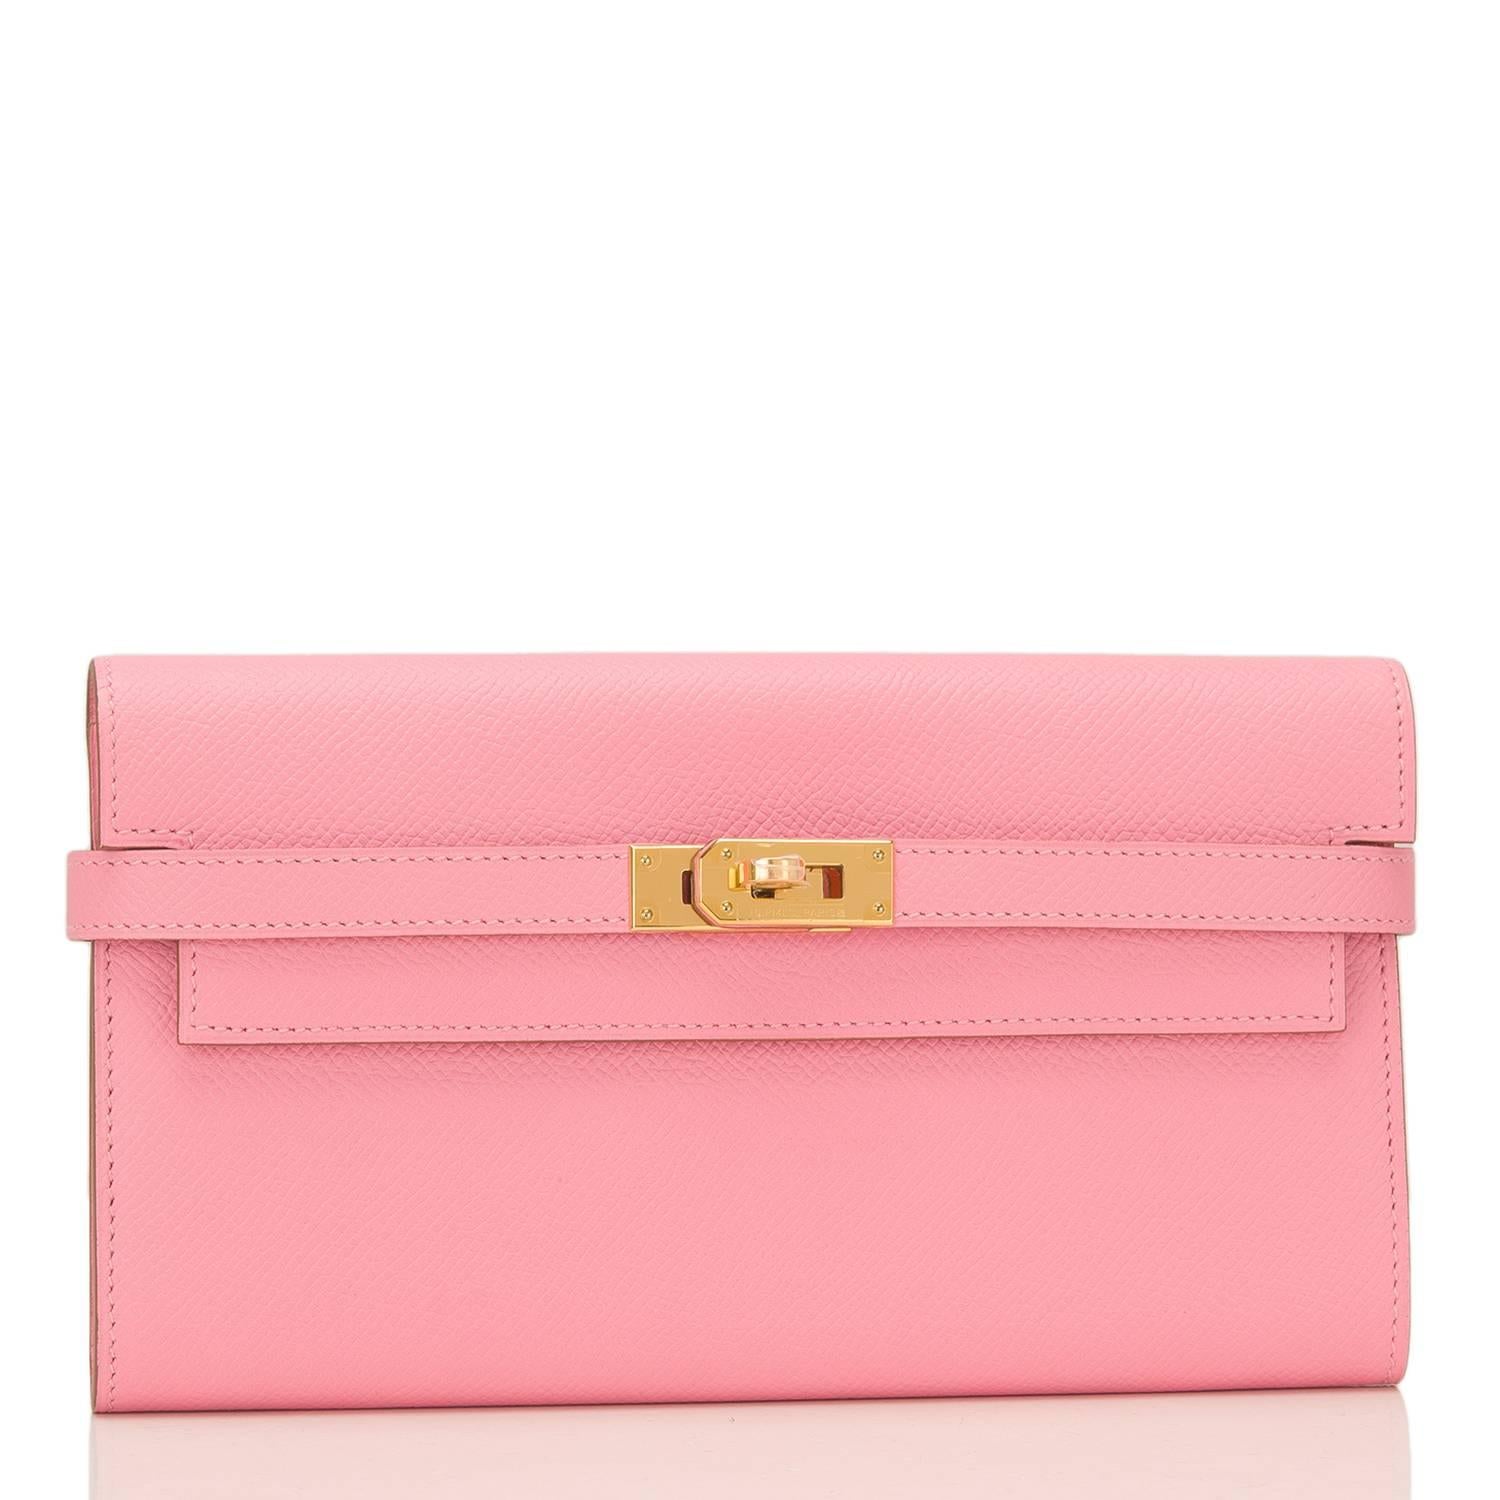 Hermes Rose Confetti Kelly Longue (Long) Wallet of epsom leather with gold hardware.

This Wallet has tonal stitching, gold hardware, and two front straps with a front toggle closure.

The interior is lined with Rose Confetti chevre leather and has